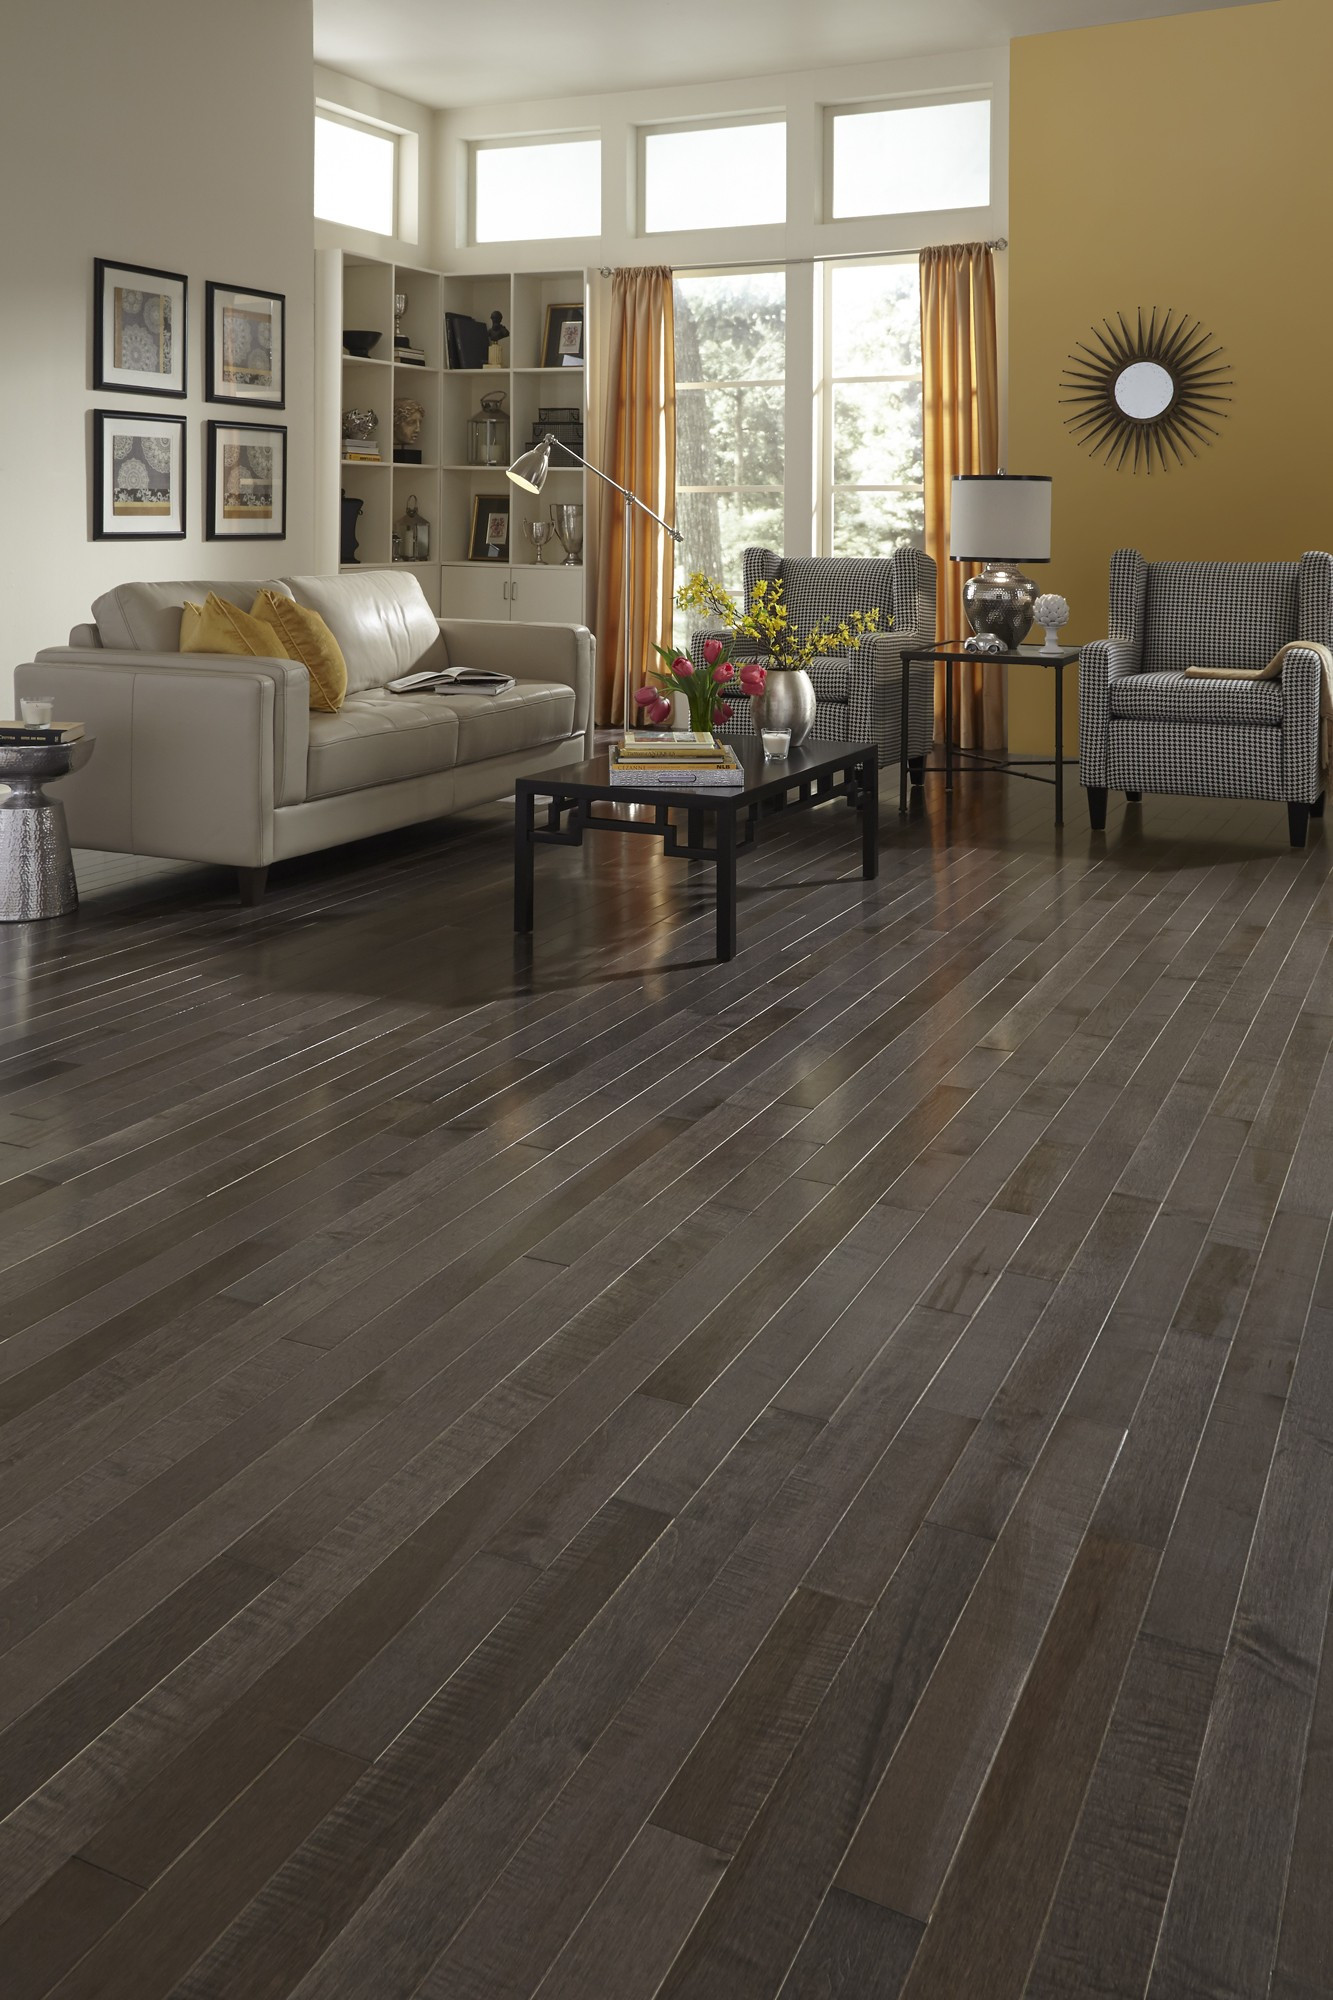 19 Fabulous Cost Of Hardwood Floors Compared to Carpet 2024 free download cost of hardwood floors compared to carpet of 15 elegant how much is hardwood flooring pics dizpos com throughout how much is hardwood flooring awesome august s top floors social gallery of 